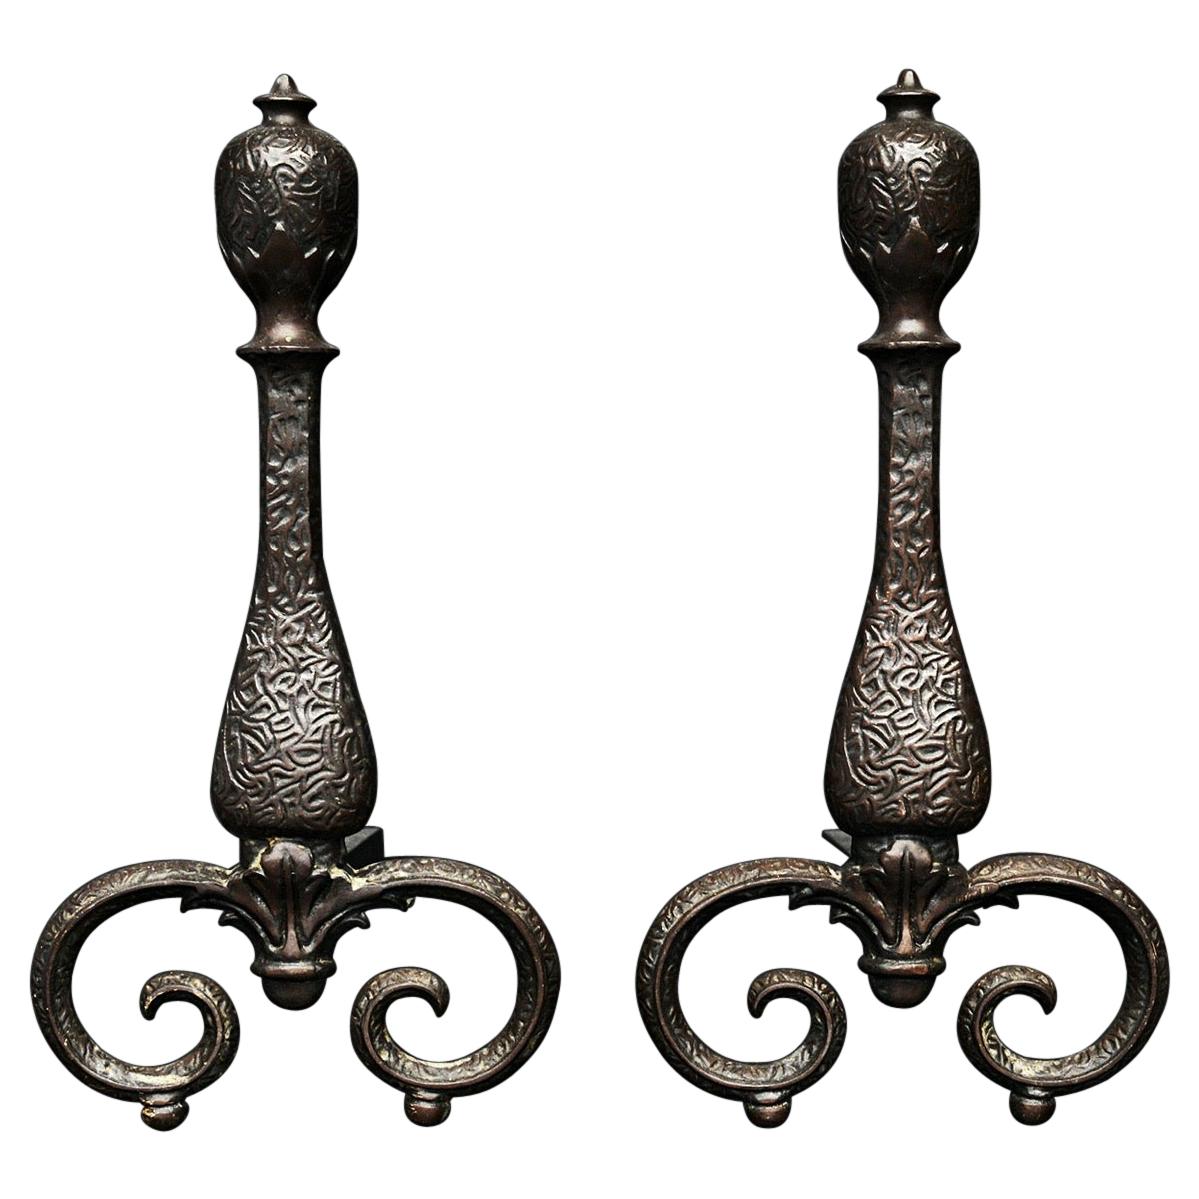 A Decorative Pair of Iron Firedogs For Sale